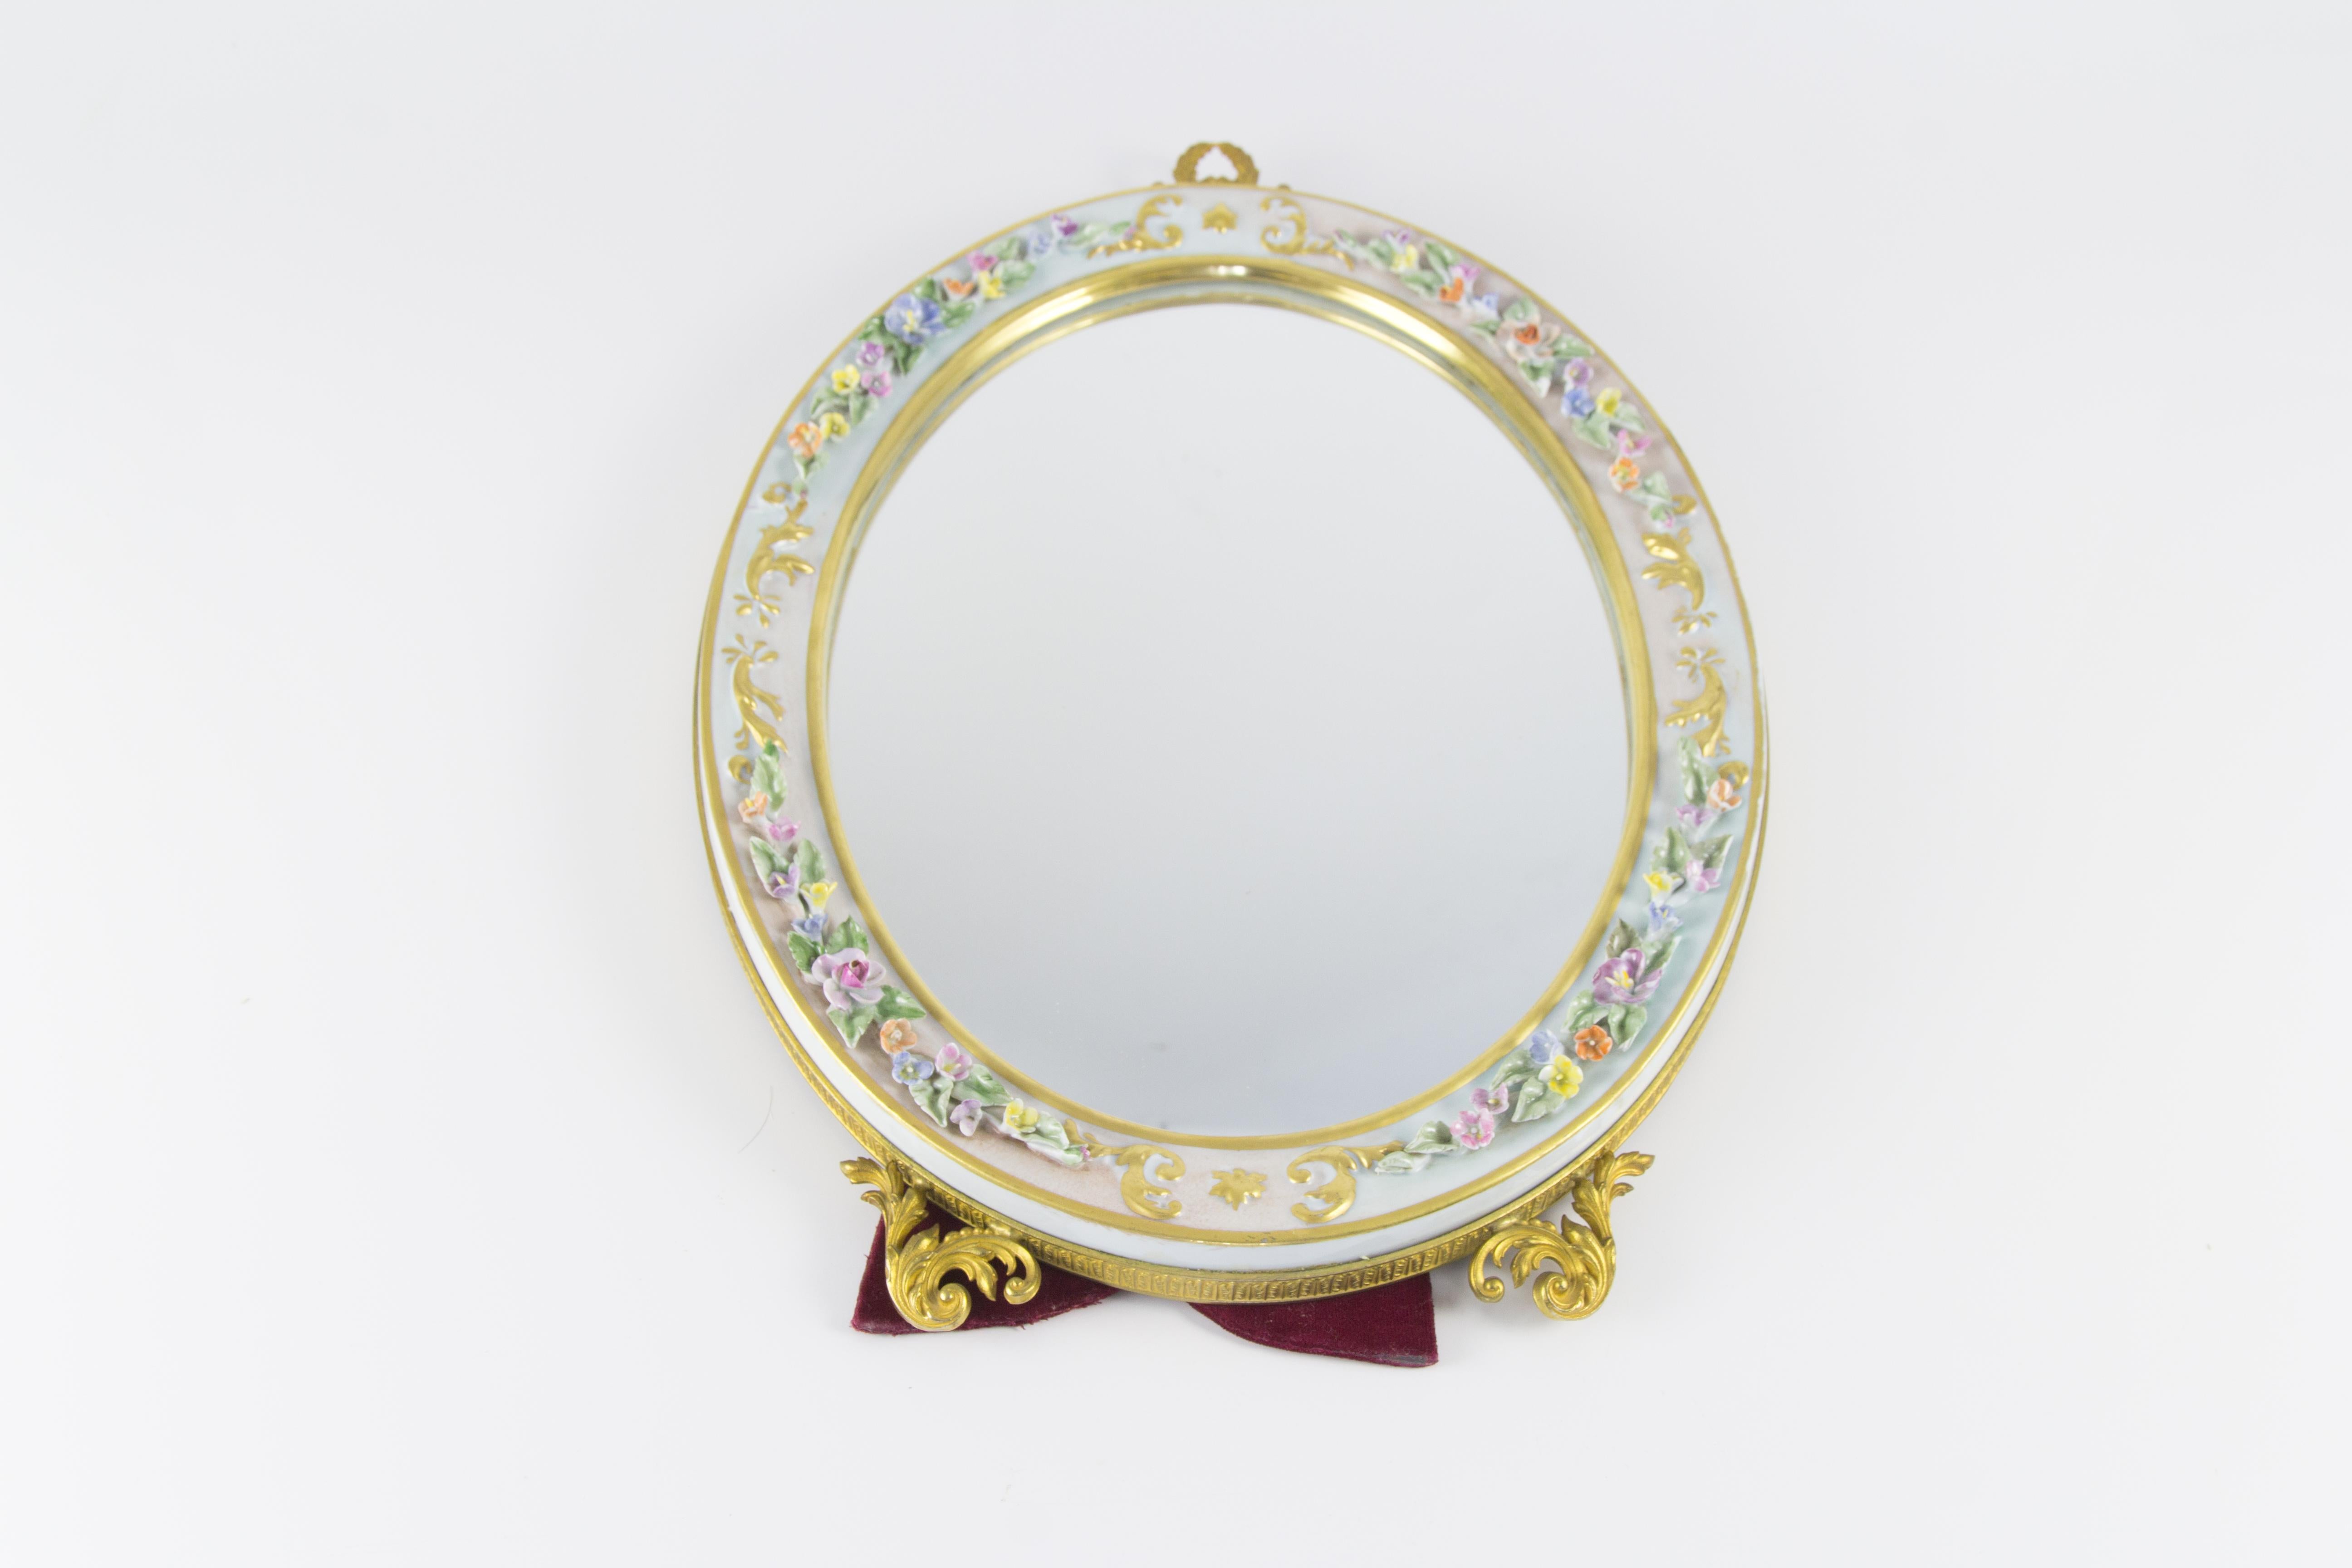 Vintage oval table mirror with porcelain frame and golden-colored metal decors. Italy, the 1950s.
The beautiful porcelain frame features detailed flowers and leaves in pastel tones.
Measures:
Height 41 cm / 16.14 in, width 28 cm / 11.02 in, depth 3